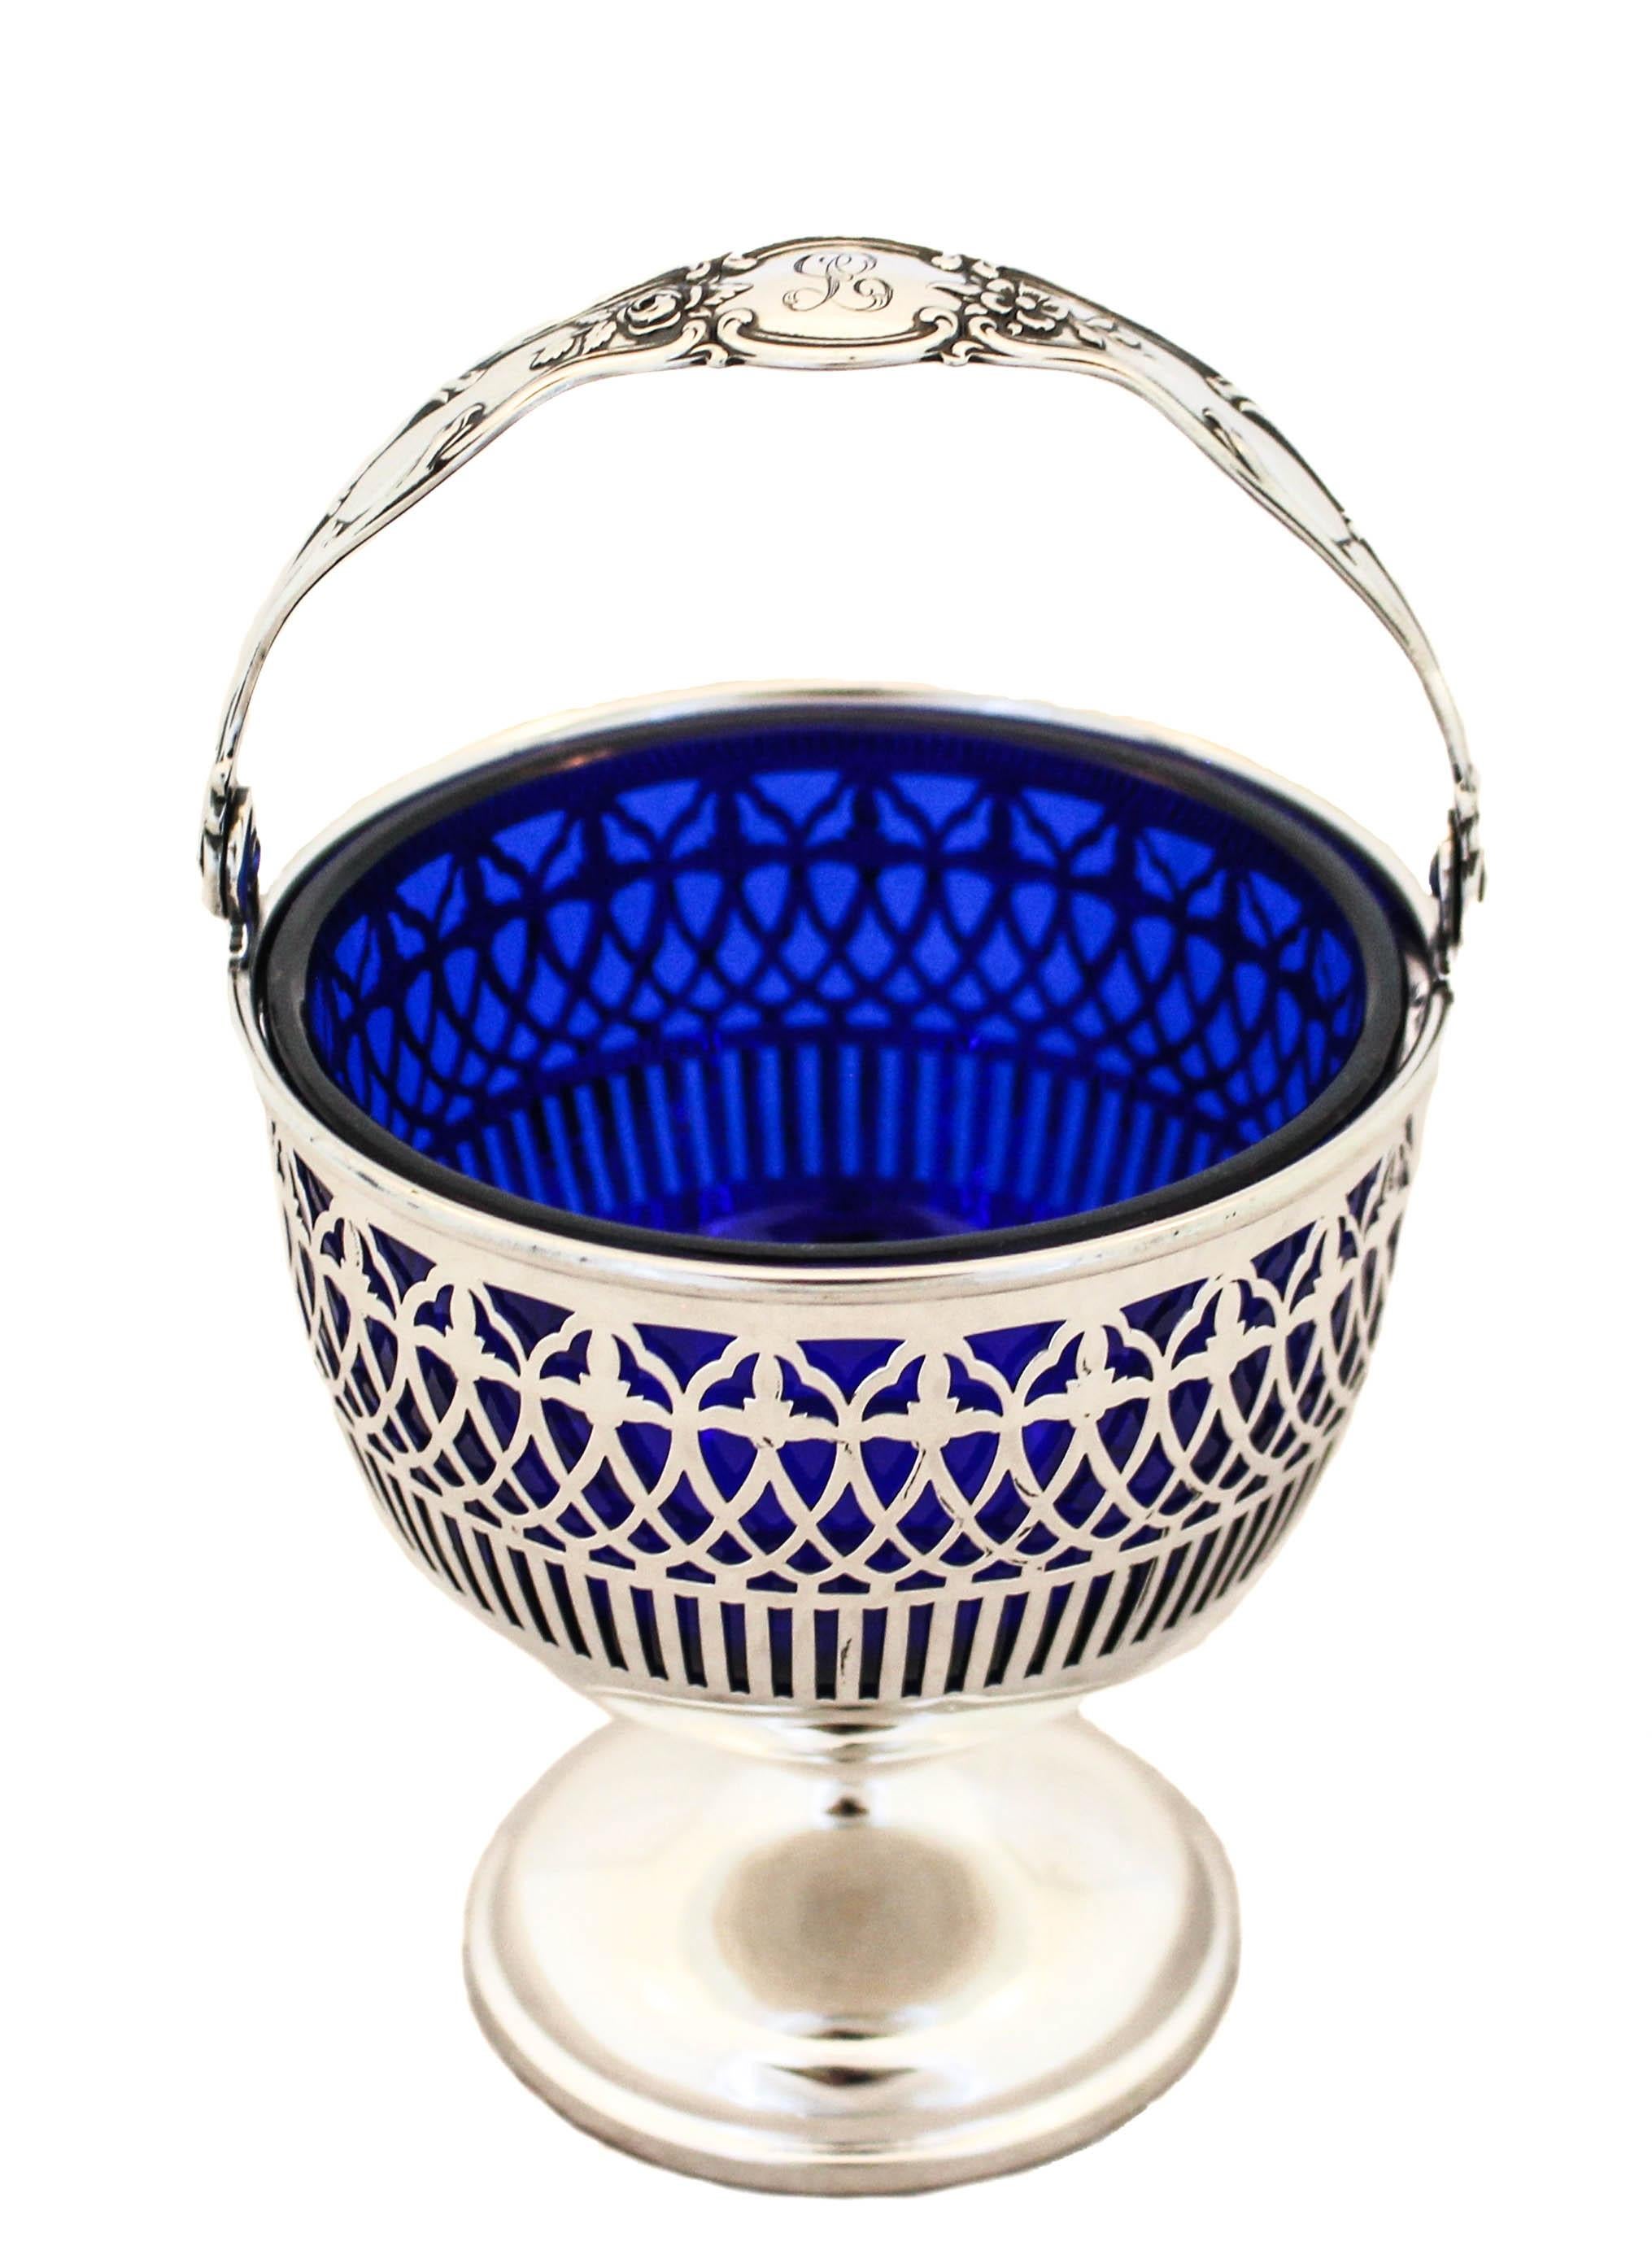 A beautiful sterling silver basket with a cobalt blue liner by Graff, Washbourne & Dunn. Standing proudly on a pedestal — not weighted, this basket has a reticulated pattern that allows the deep blue glass to shine through the sterling silver work.